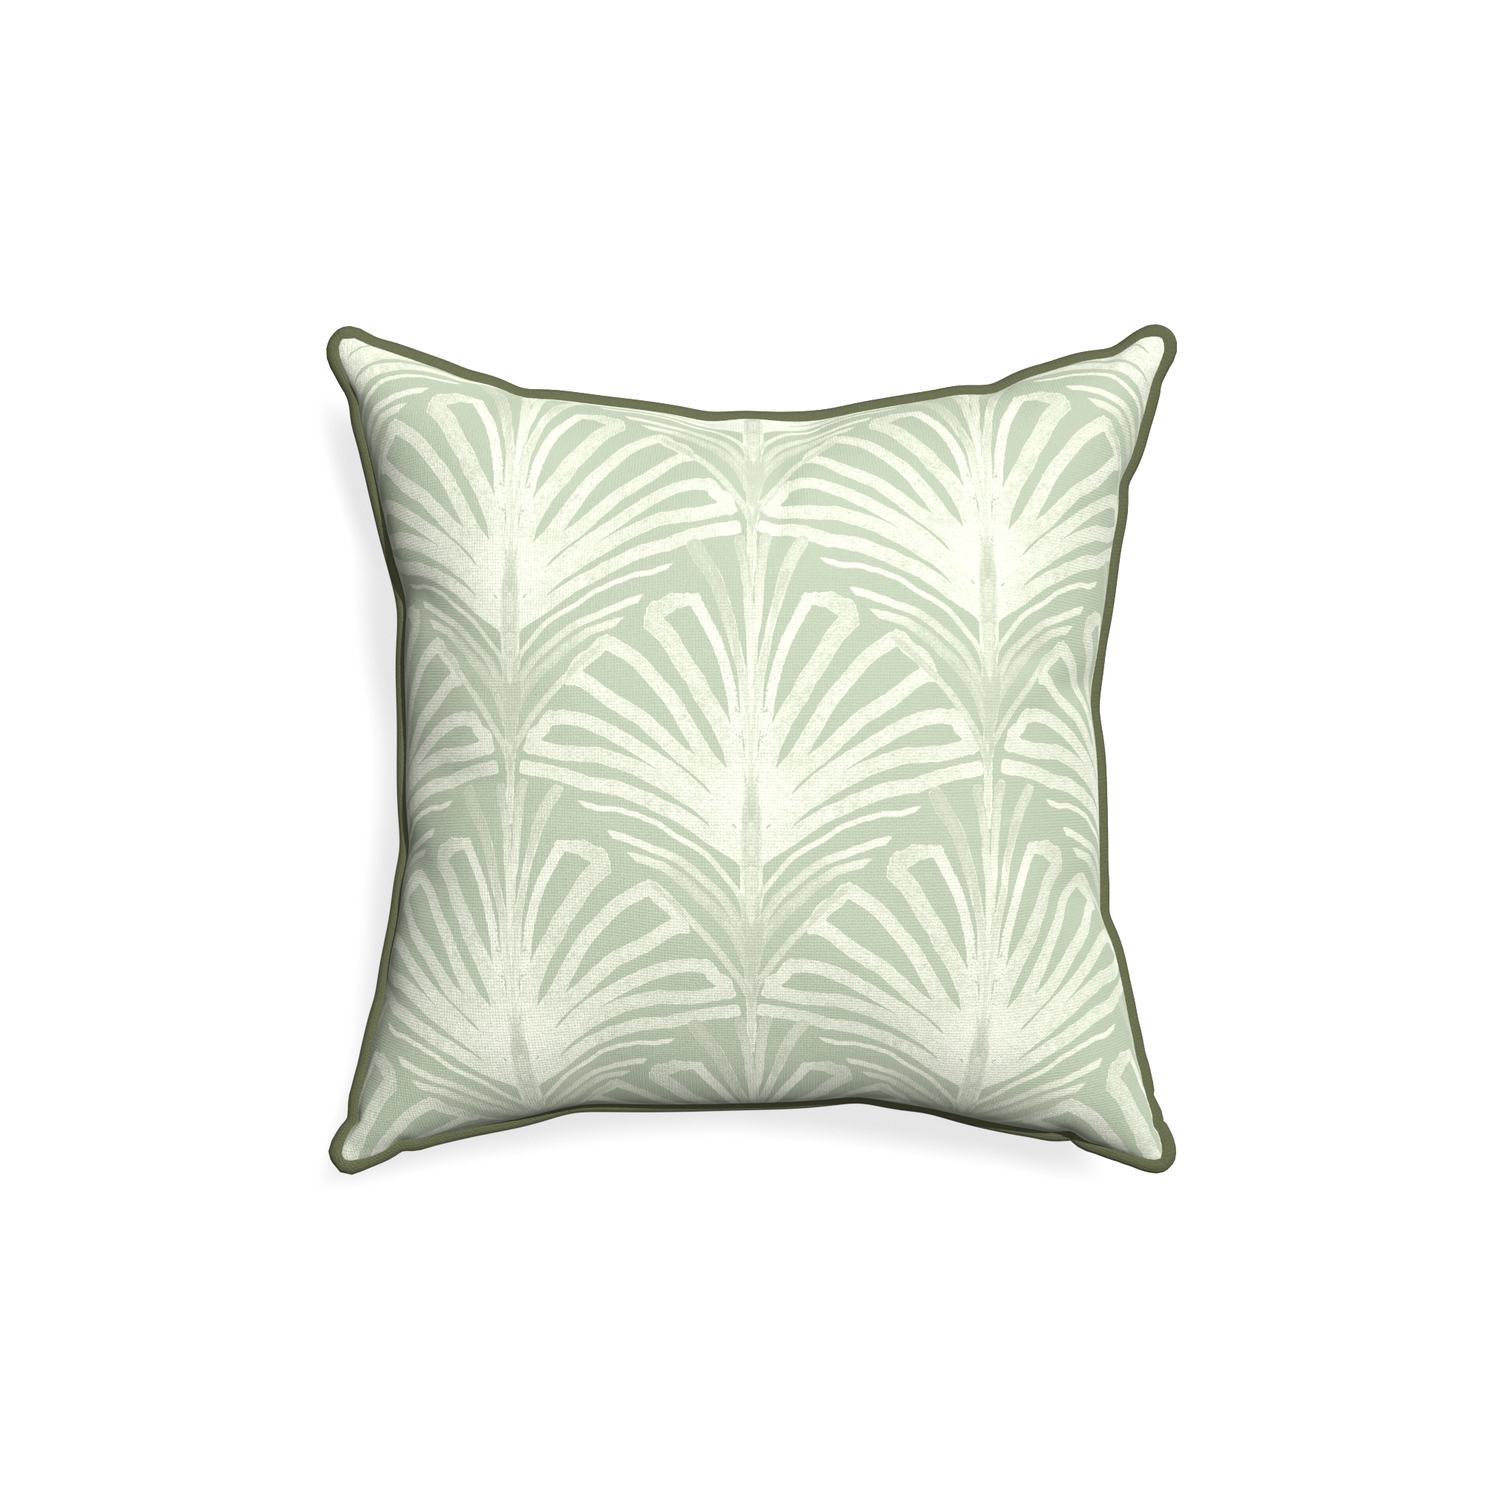 18-square suzy sage custom pillow with f piping on white background